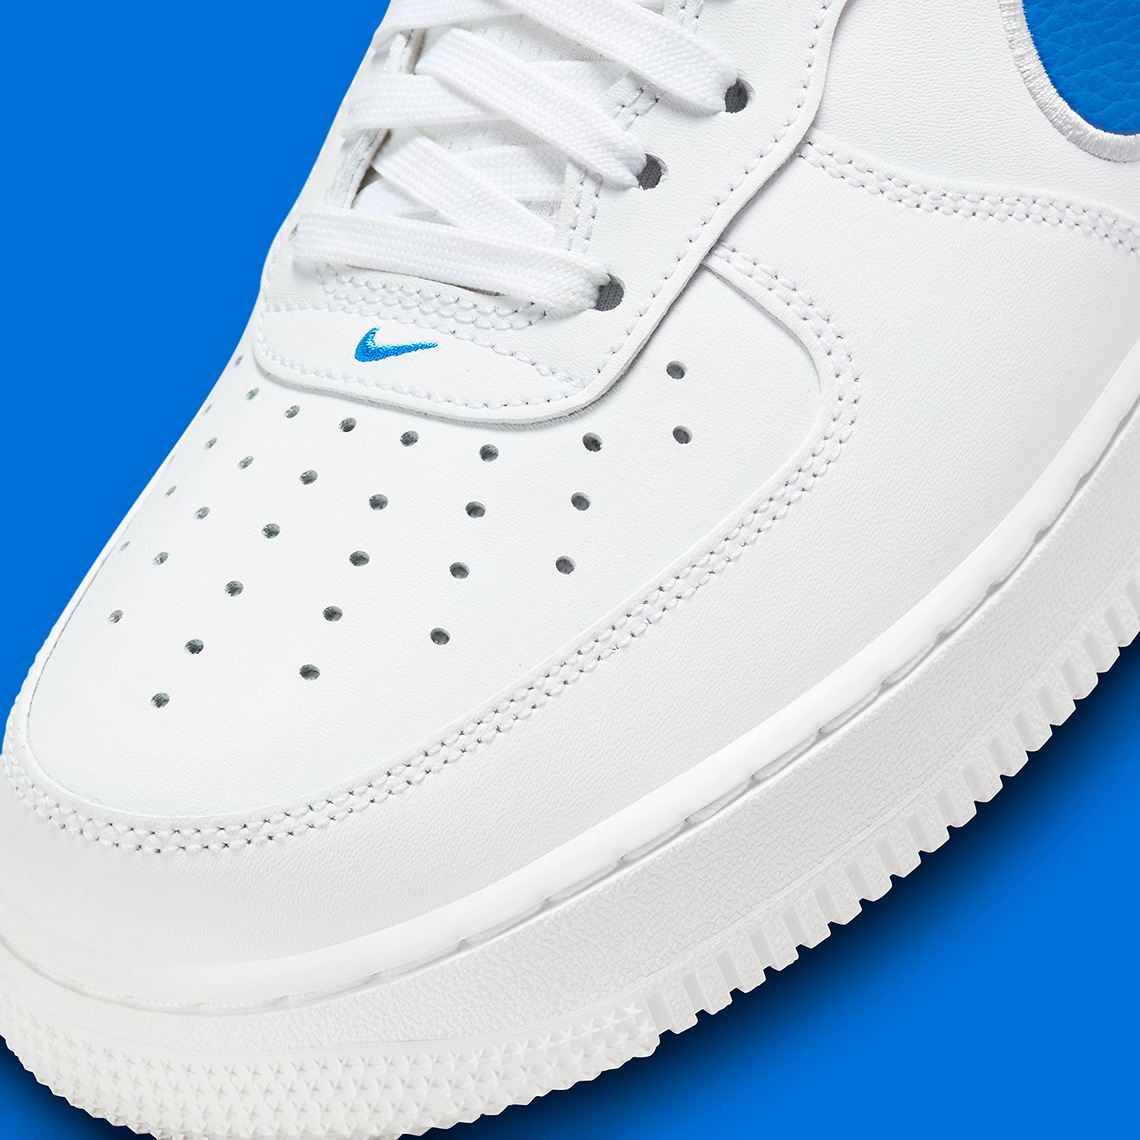 nike sneakers air force 1 low white blue fn7804 100 7